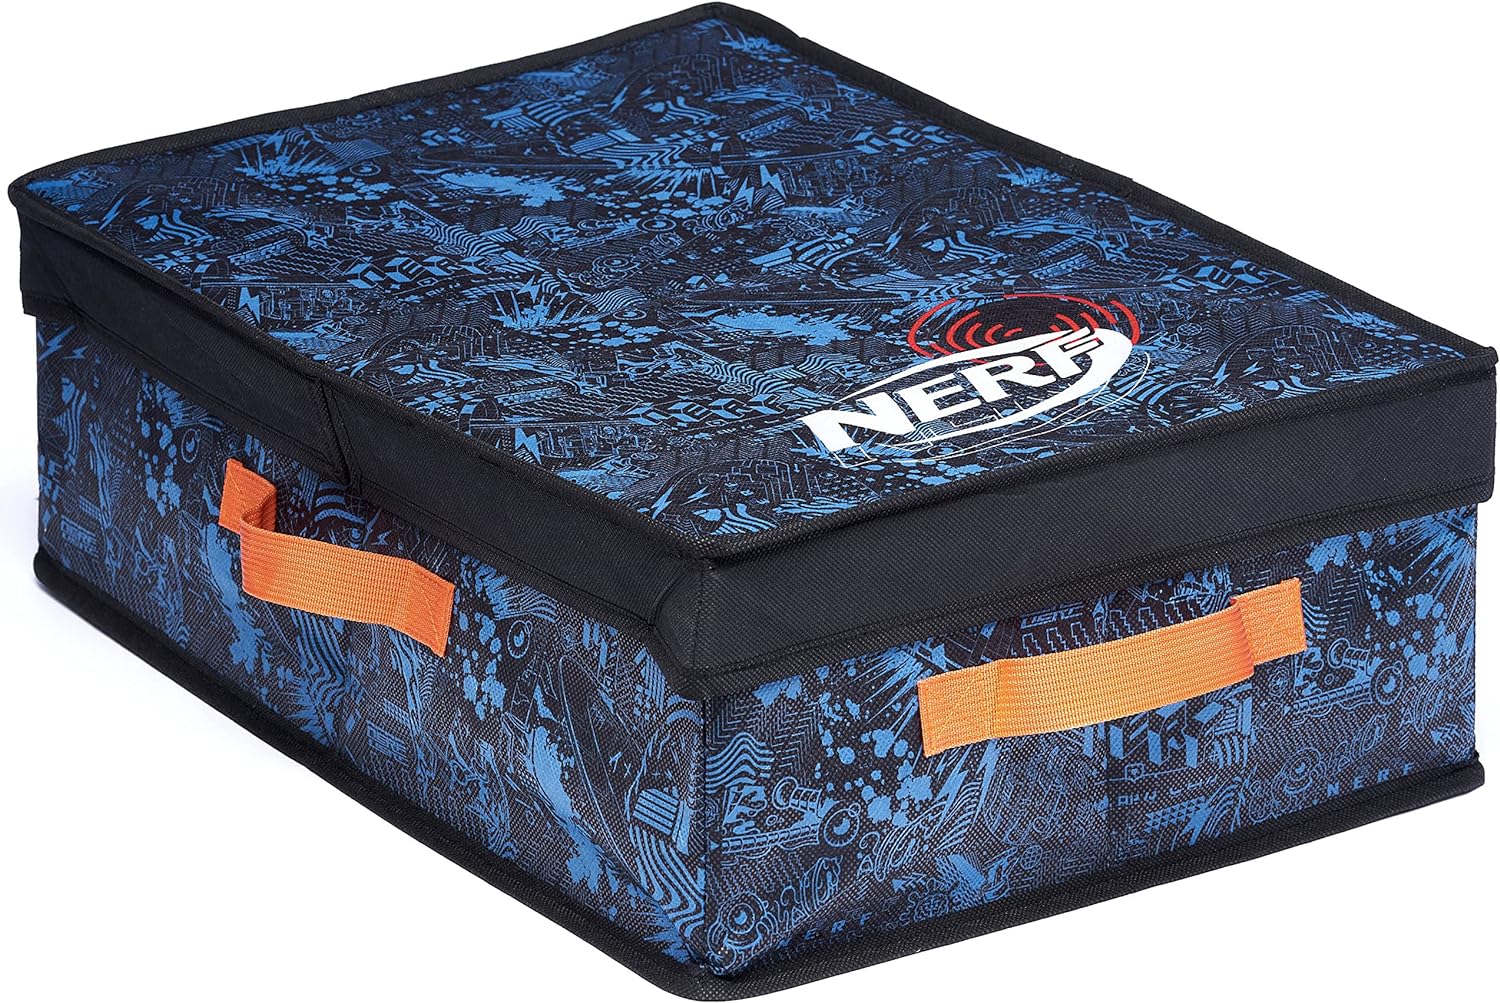 Nerf Bunkr Officially Licensed Combat Carrier Case Under The Bed Storage for Nerf Blasters Foam Darts and Rounds - Perfect for Nerf Party Nerf War, Multicolor